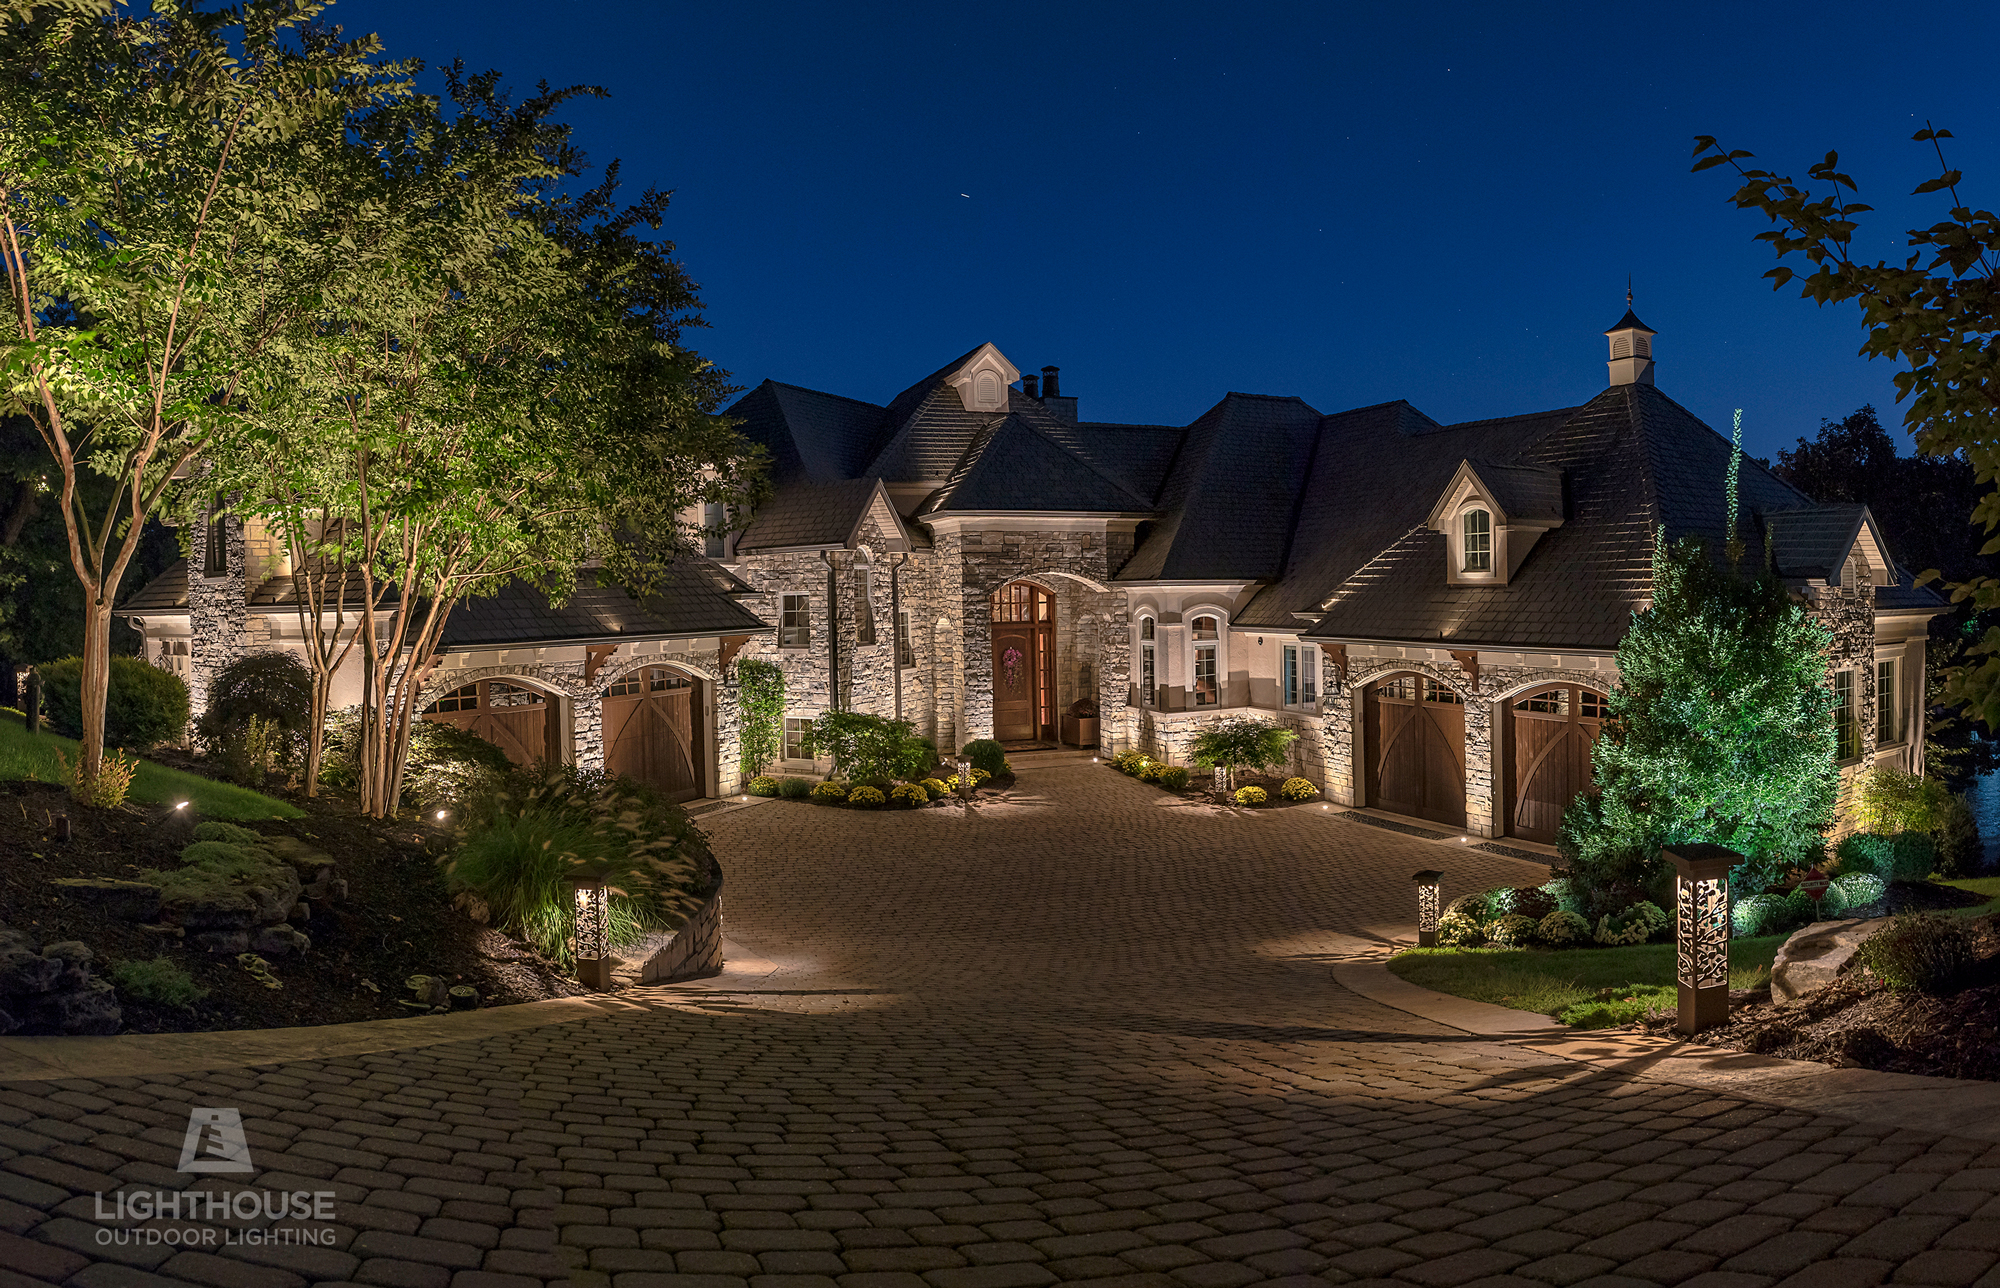 Driveway lighting in Chesterbrook, PA